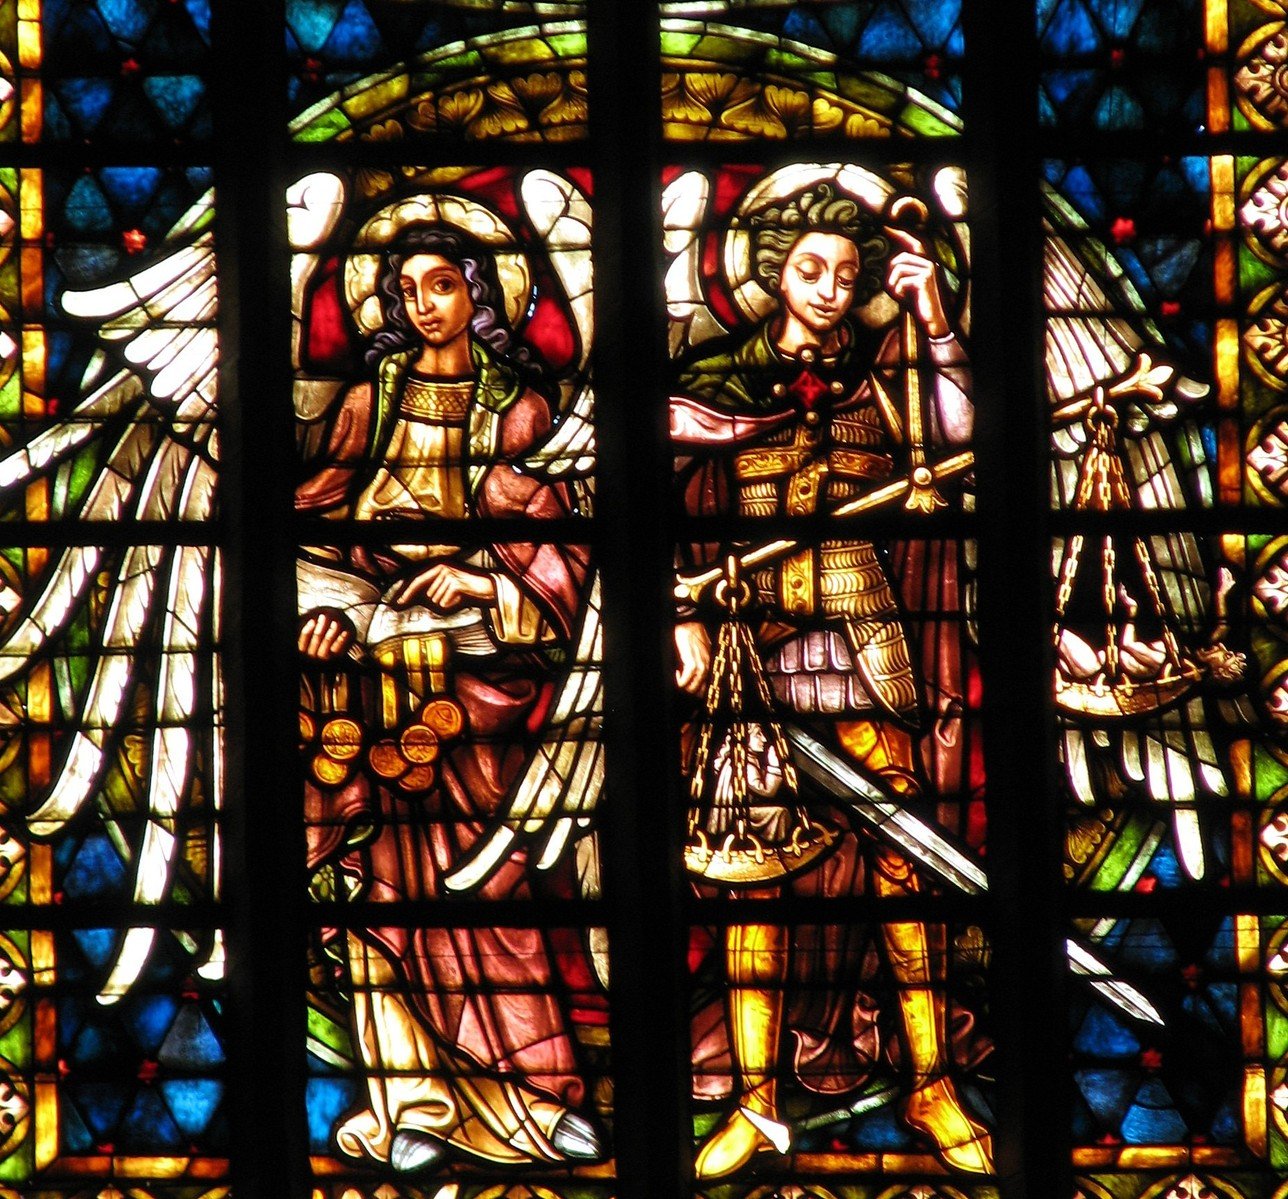 the stain glass window in a church features the angels holding weapons